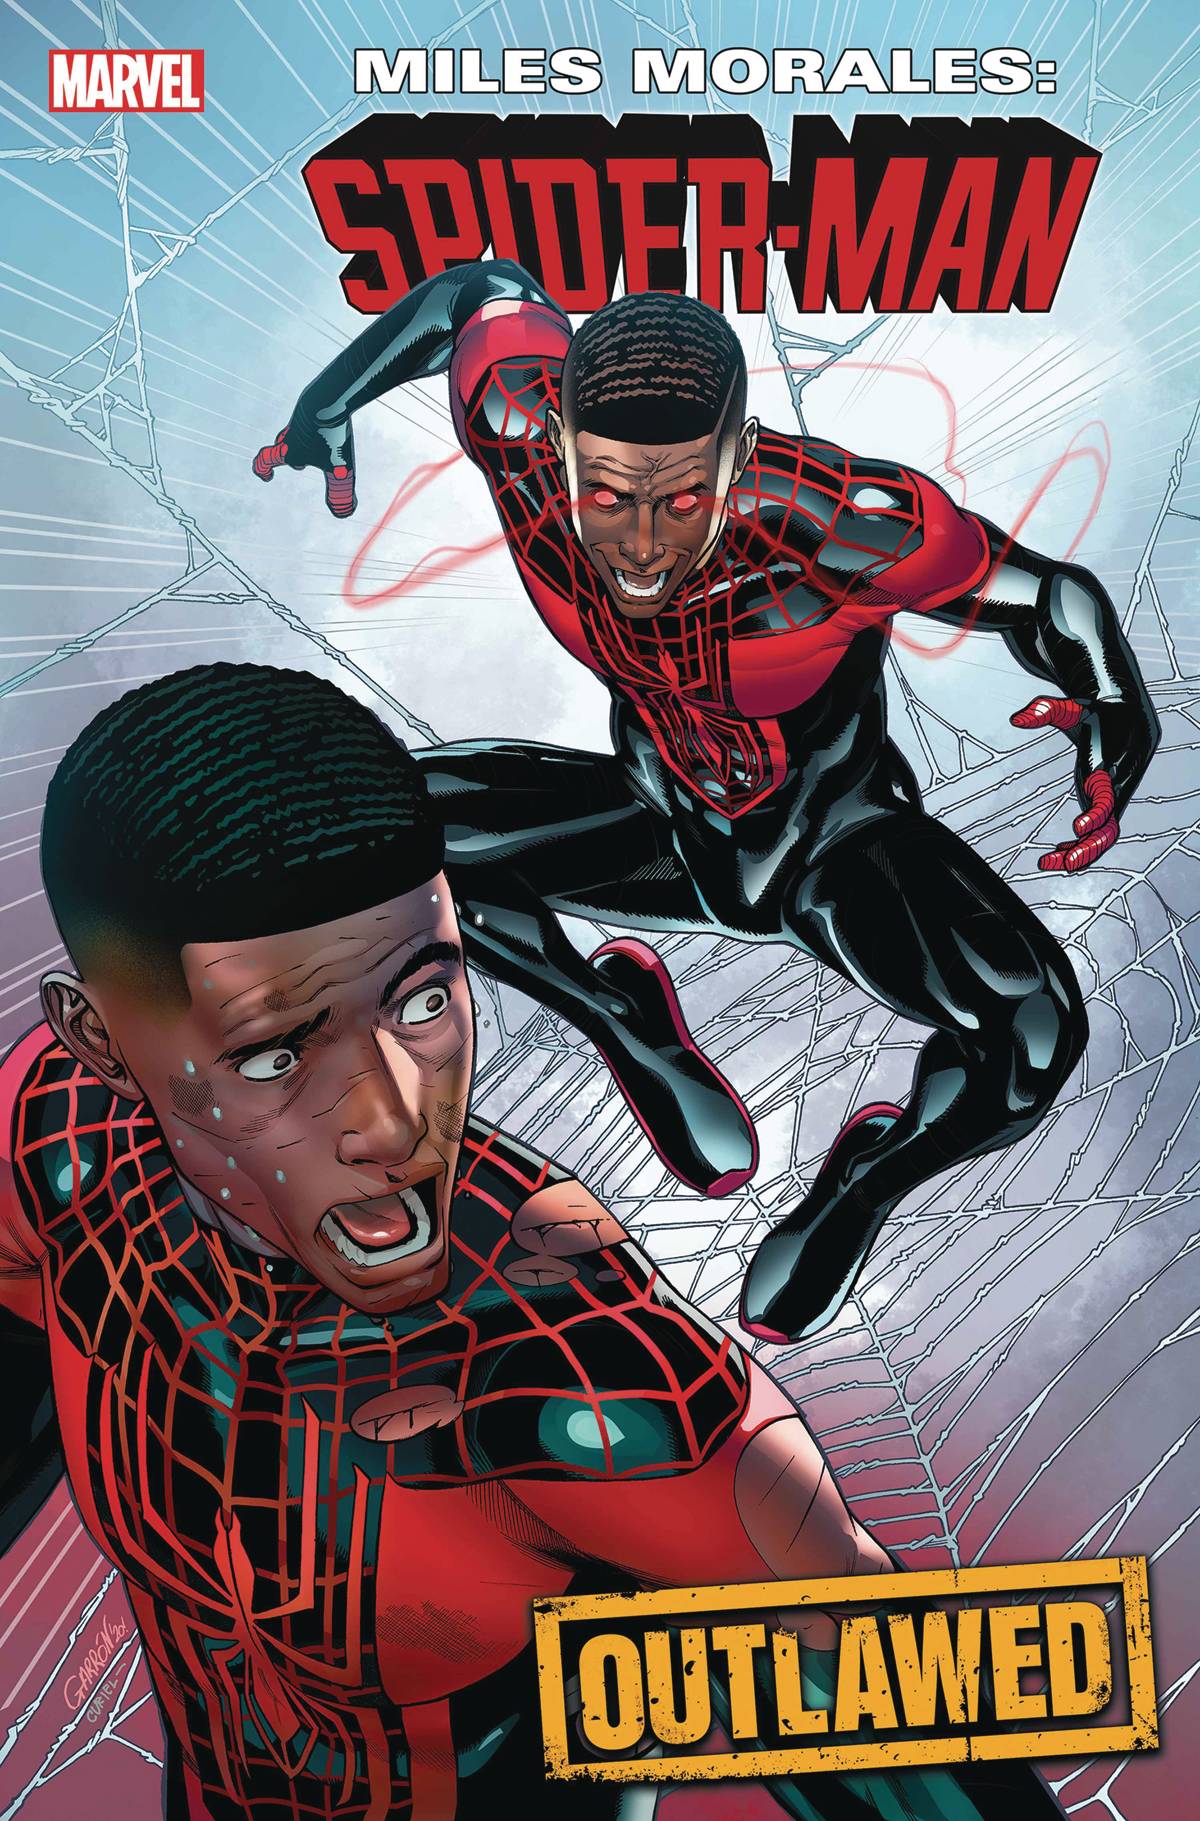 MILES MORALES SPIDER-MAN #19 OUT